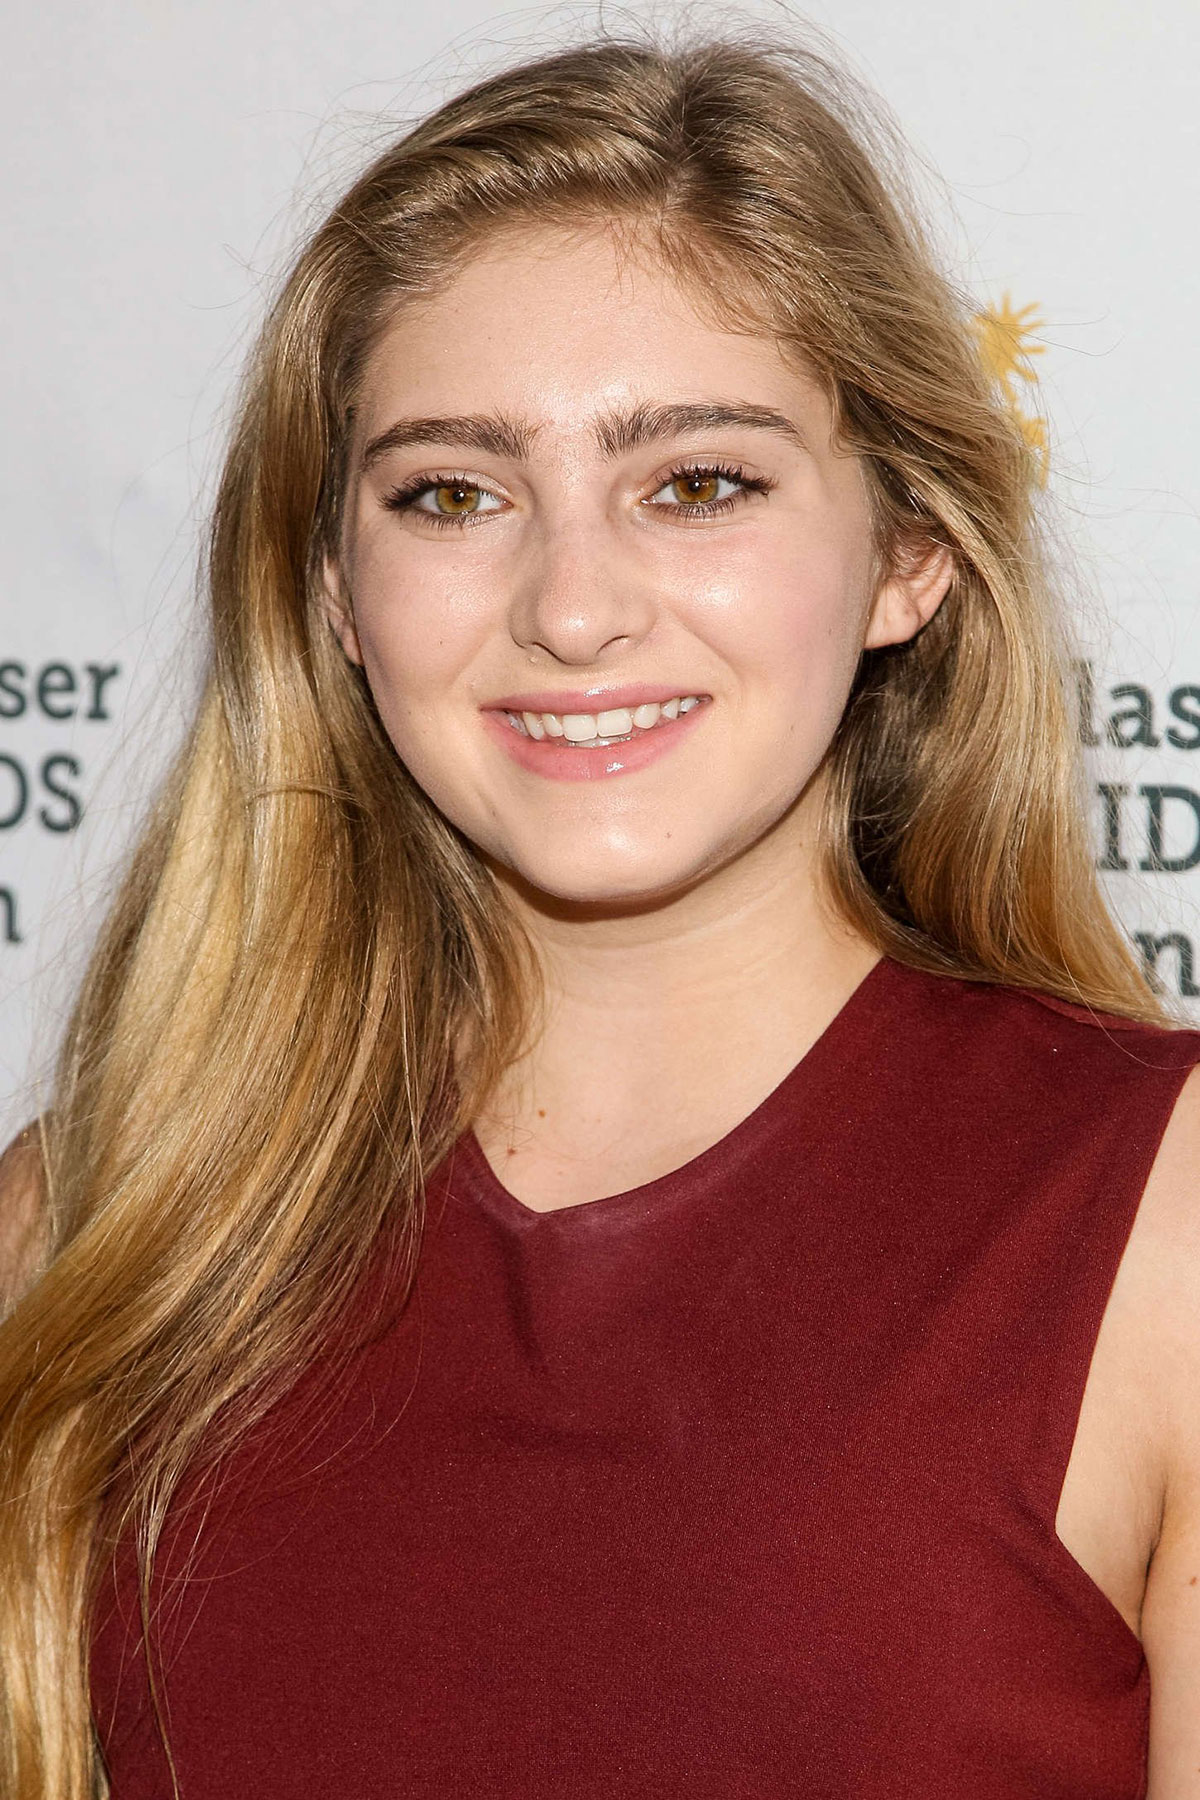 WILLOW SHIELDS at A Time for Heroes Celebration in Culver City.